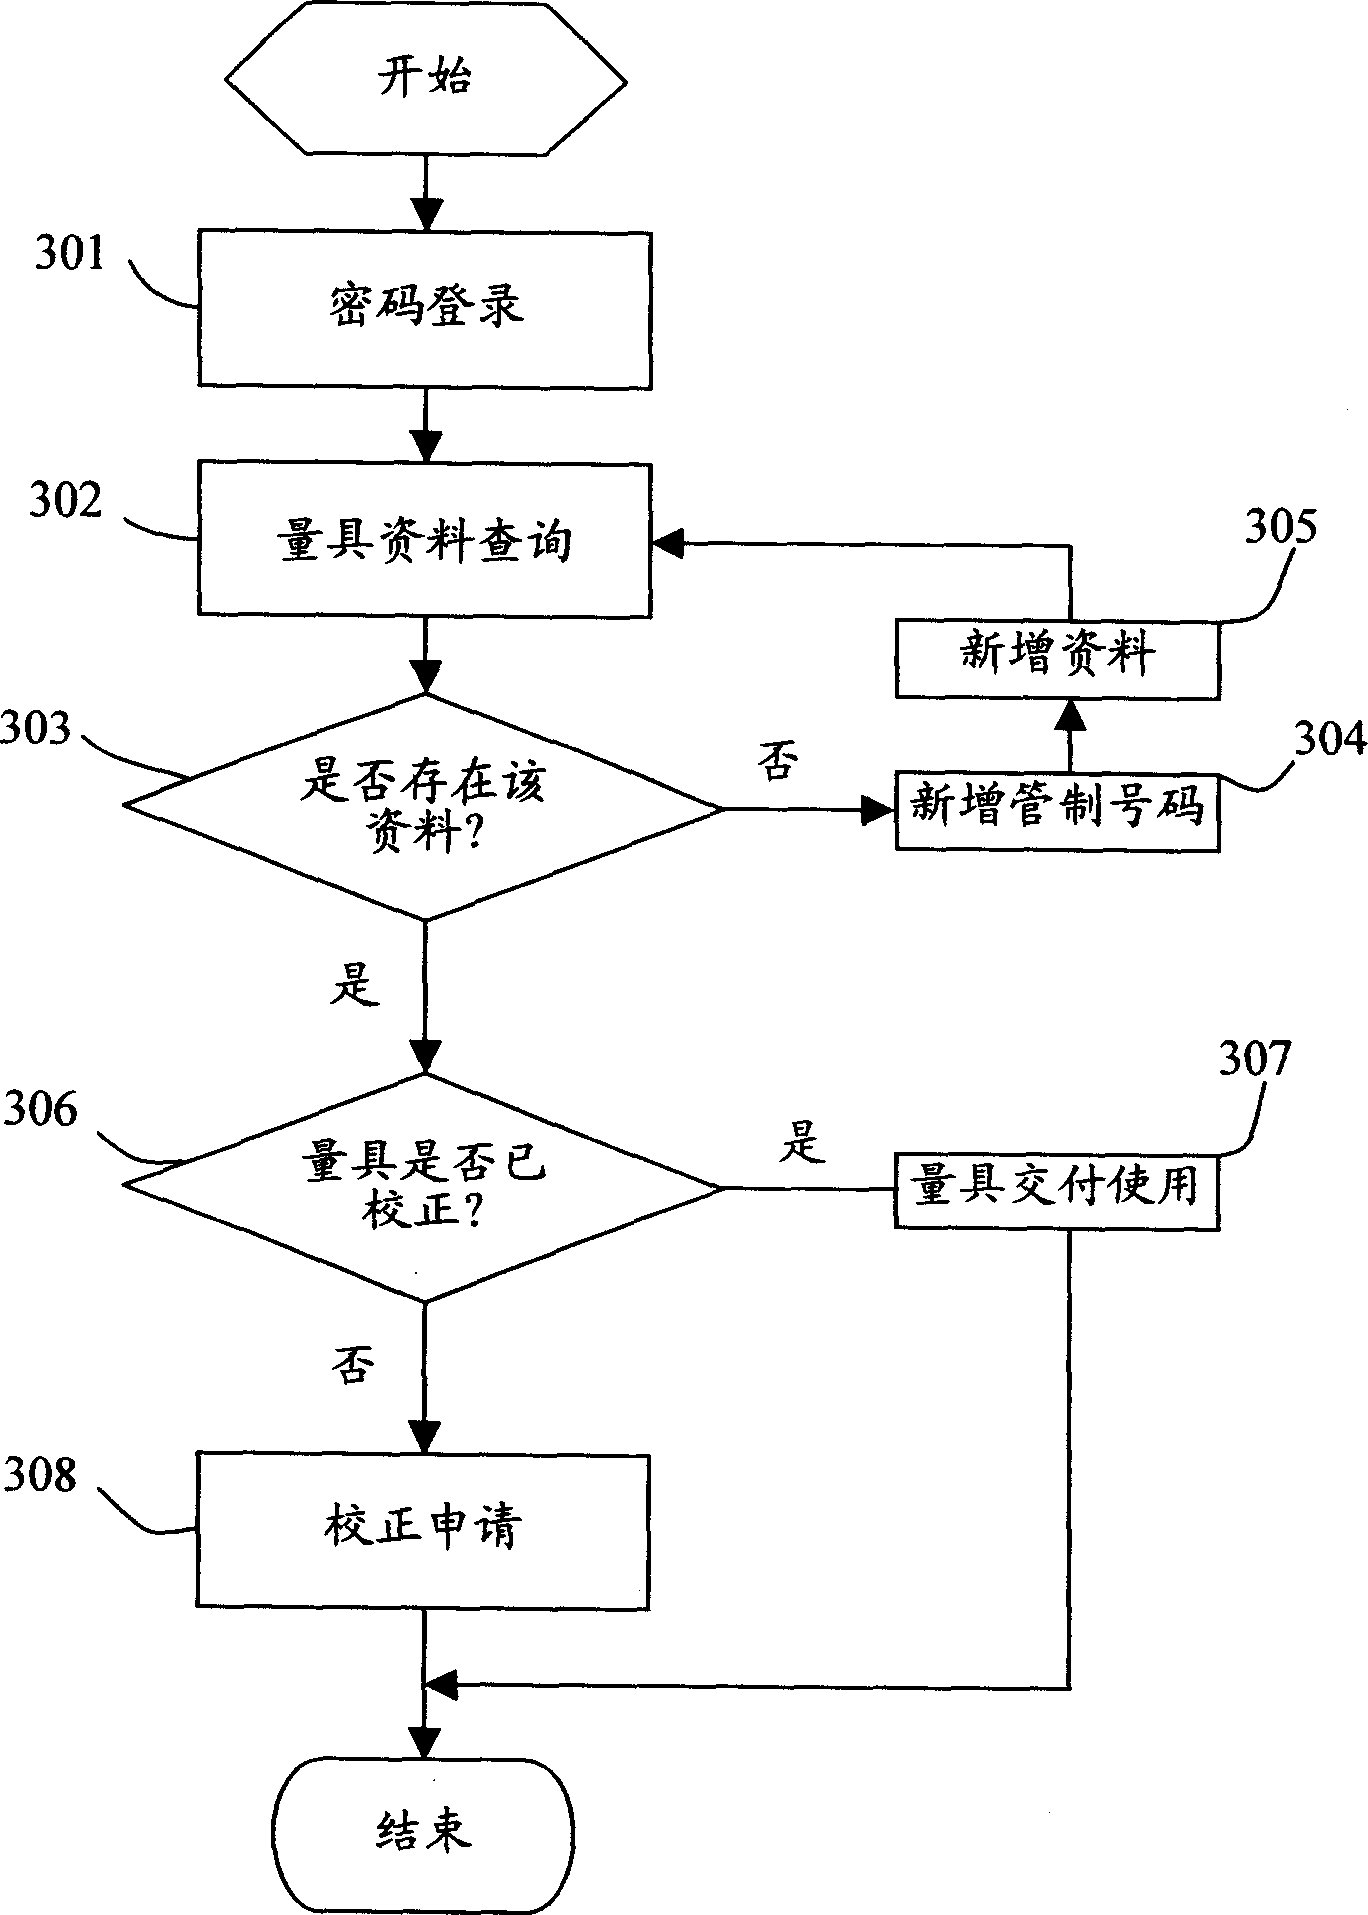 Measuring implement managing system and method